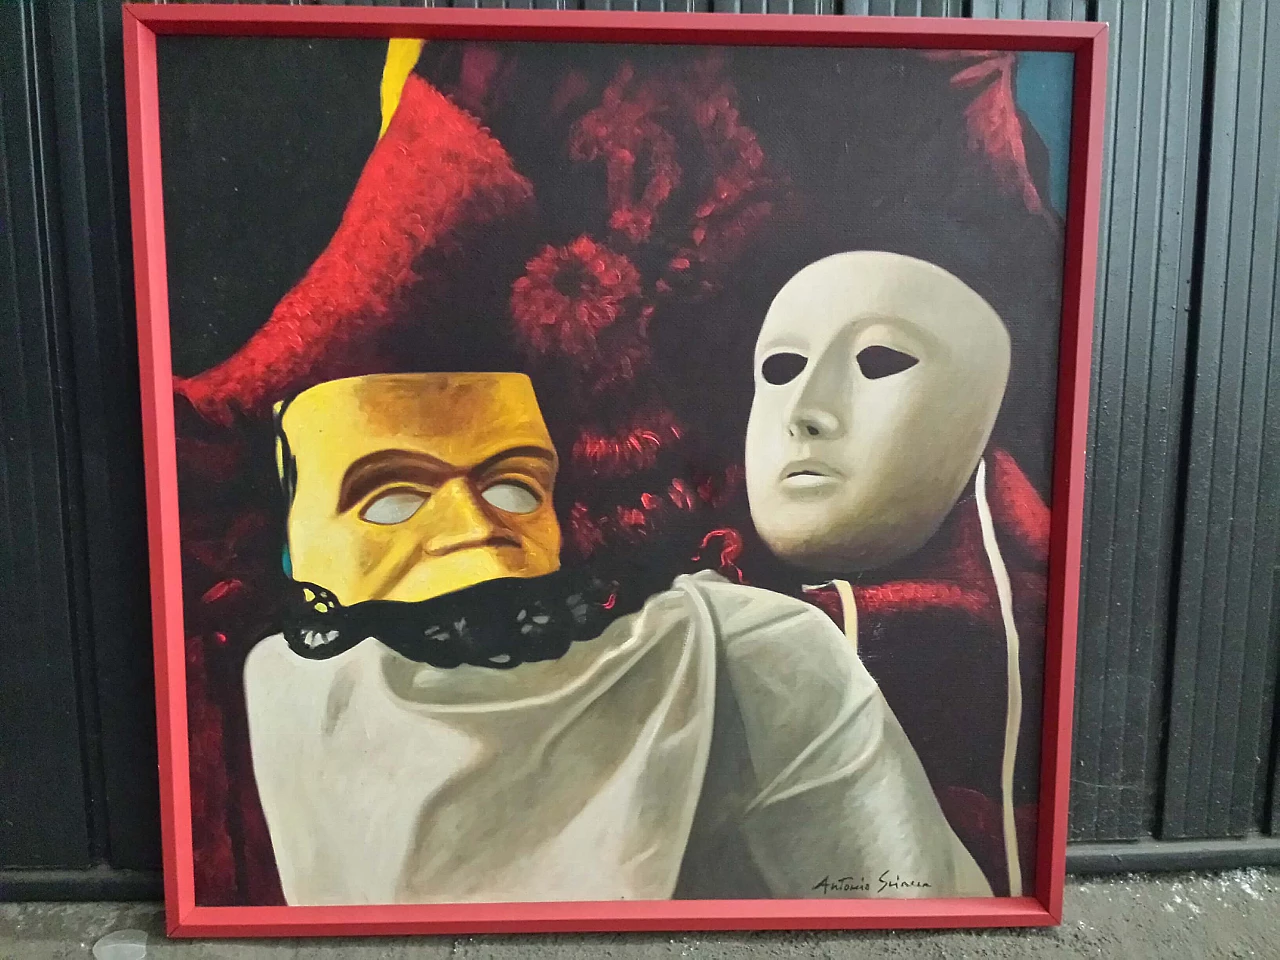 Antonio Sciacca, still life with masks, oil painting on canvas 1